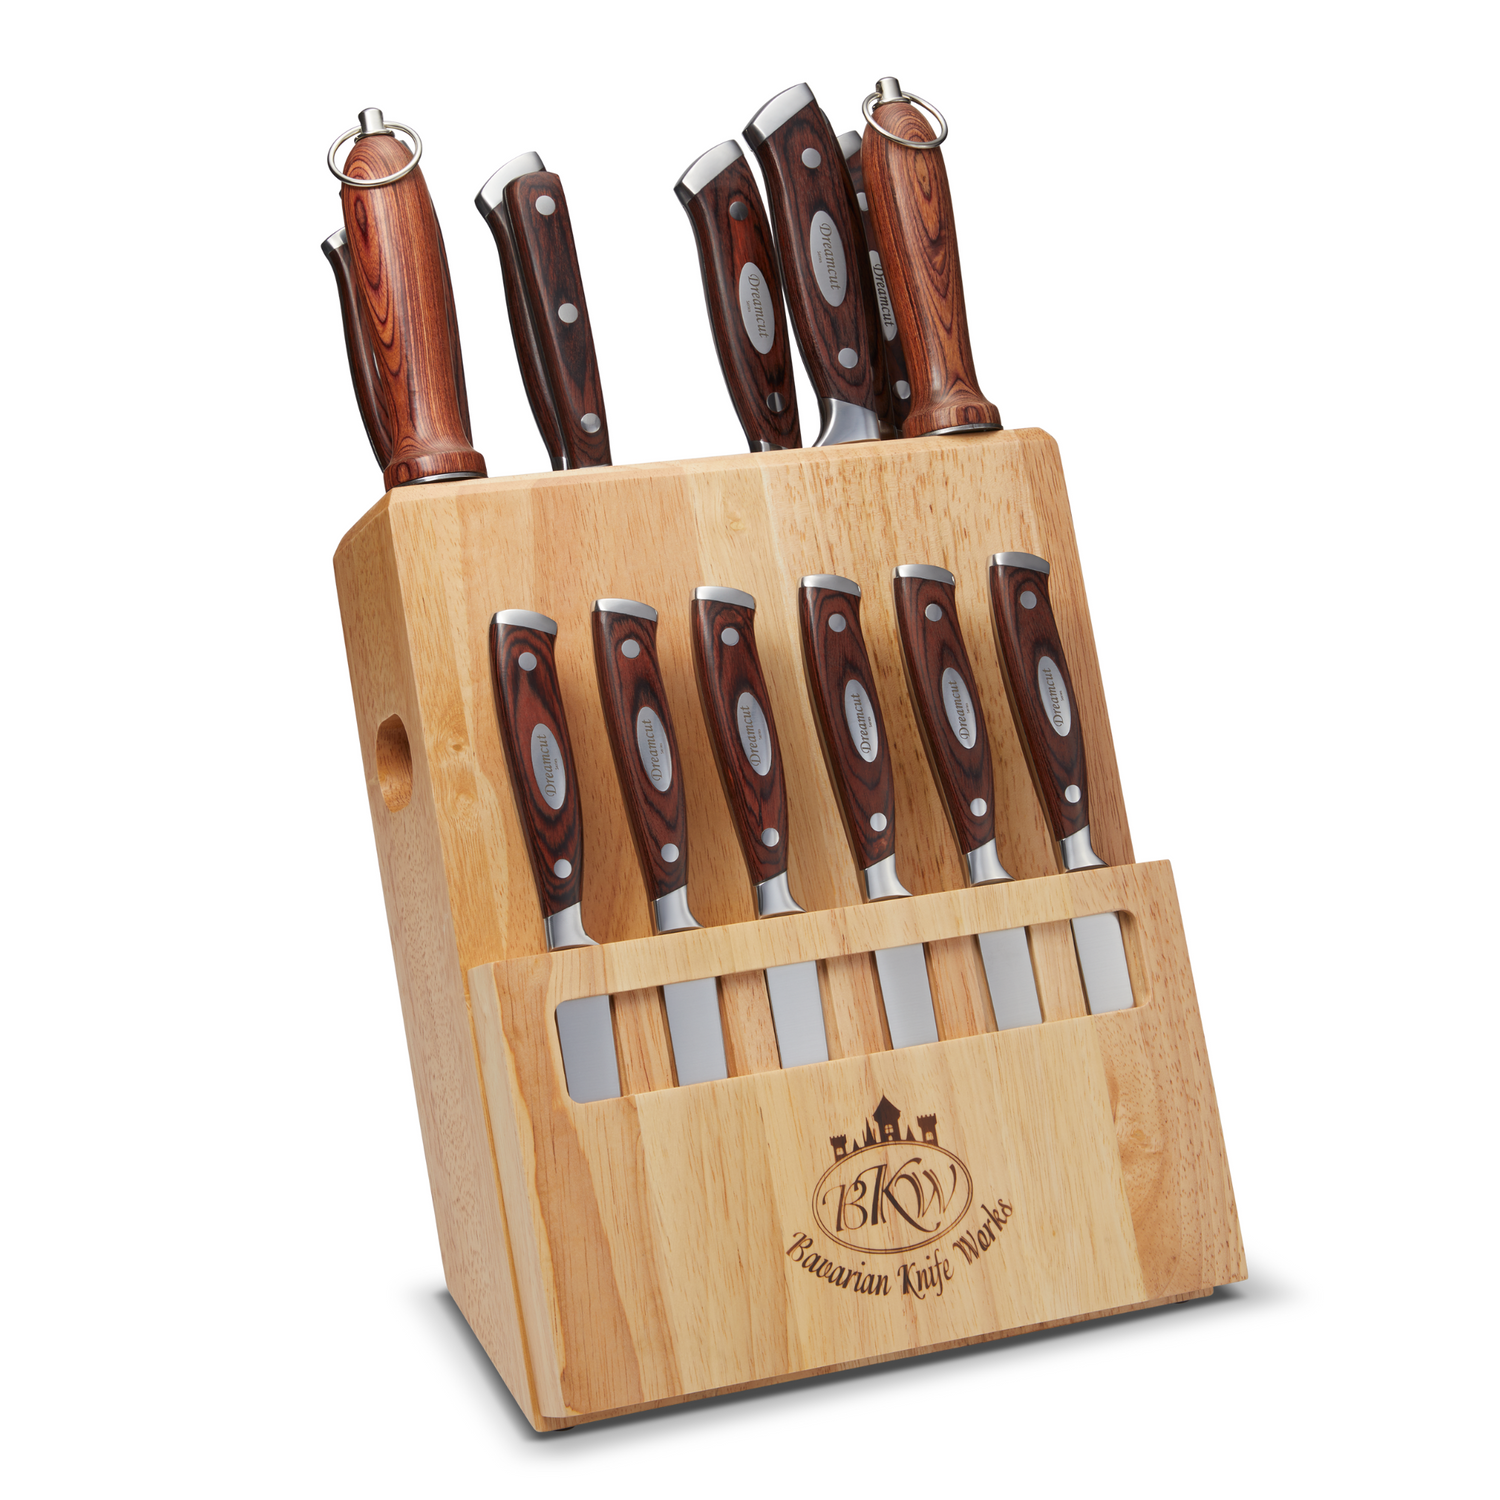 Easter Sale ! - 19 pc set- 12 pc set plus steak knives,  order today and get a free single Knife